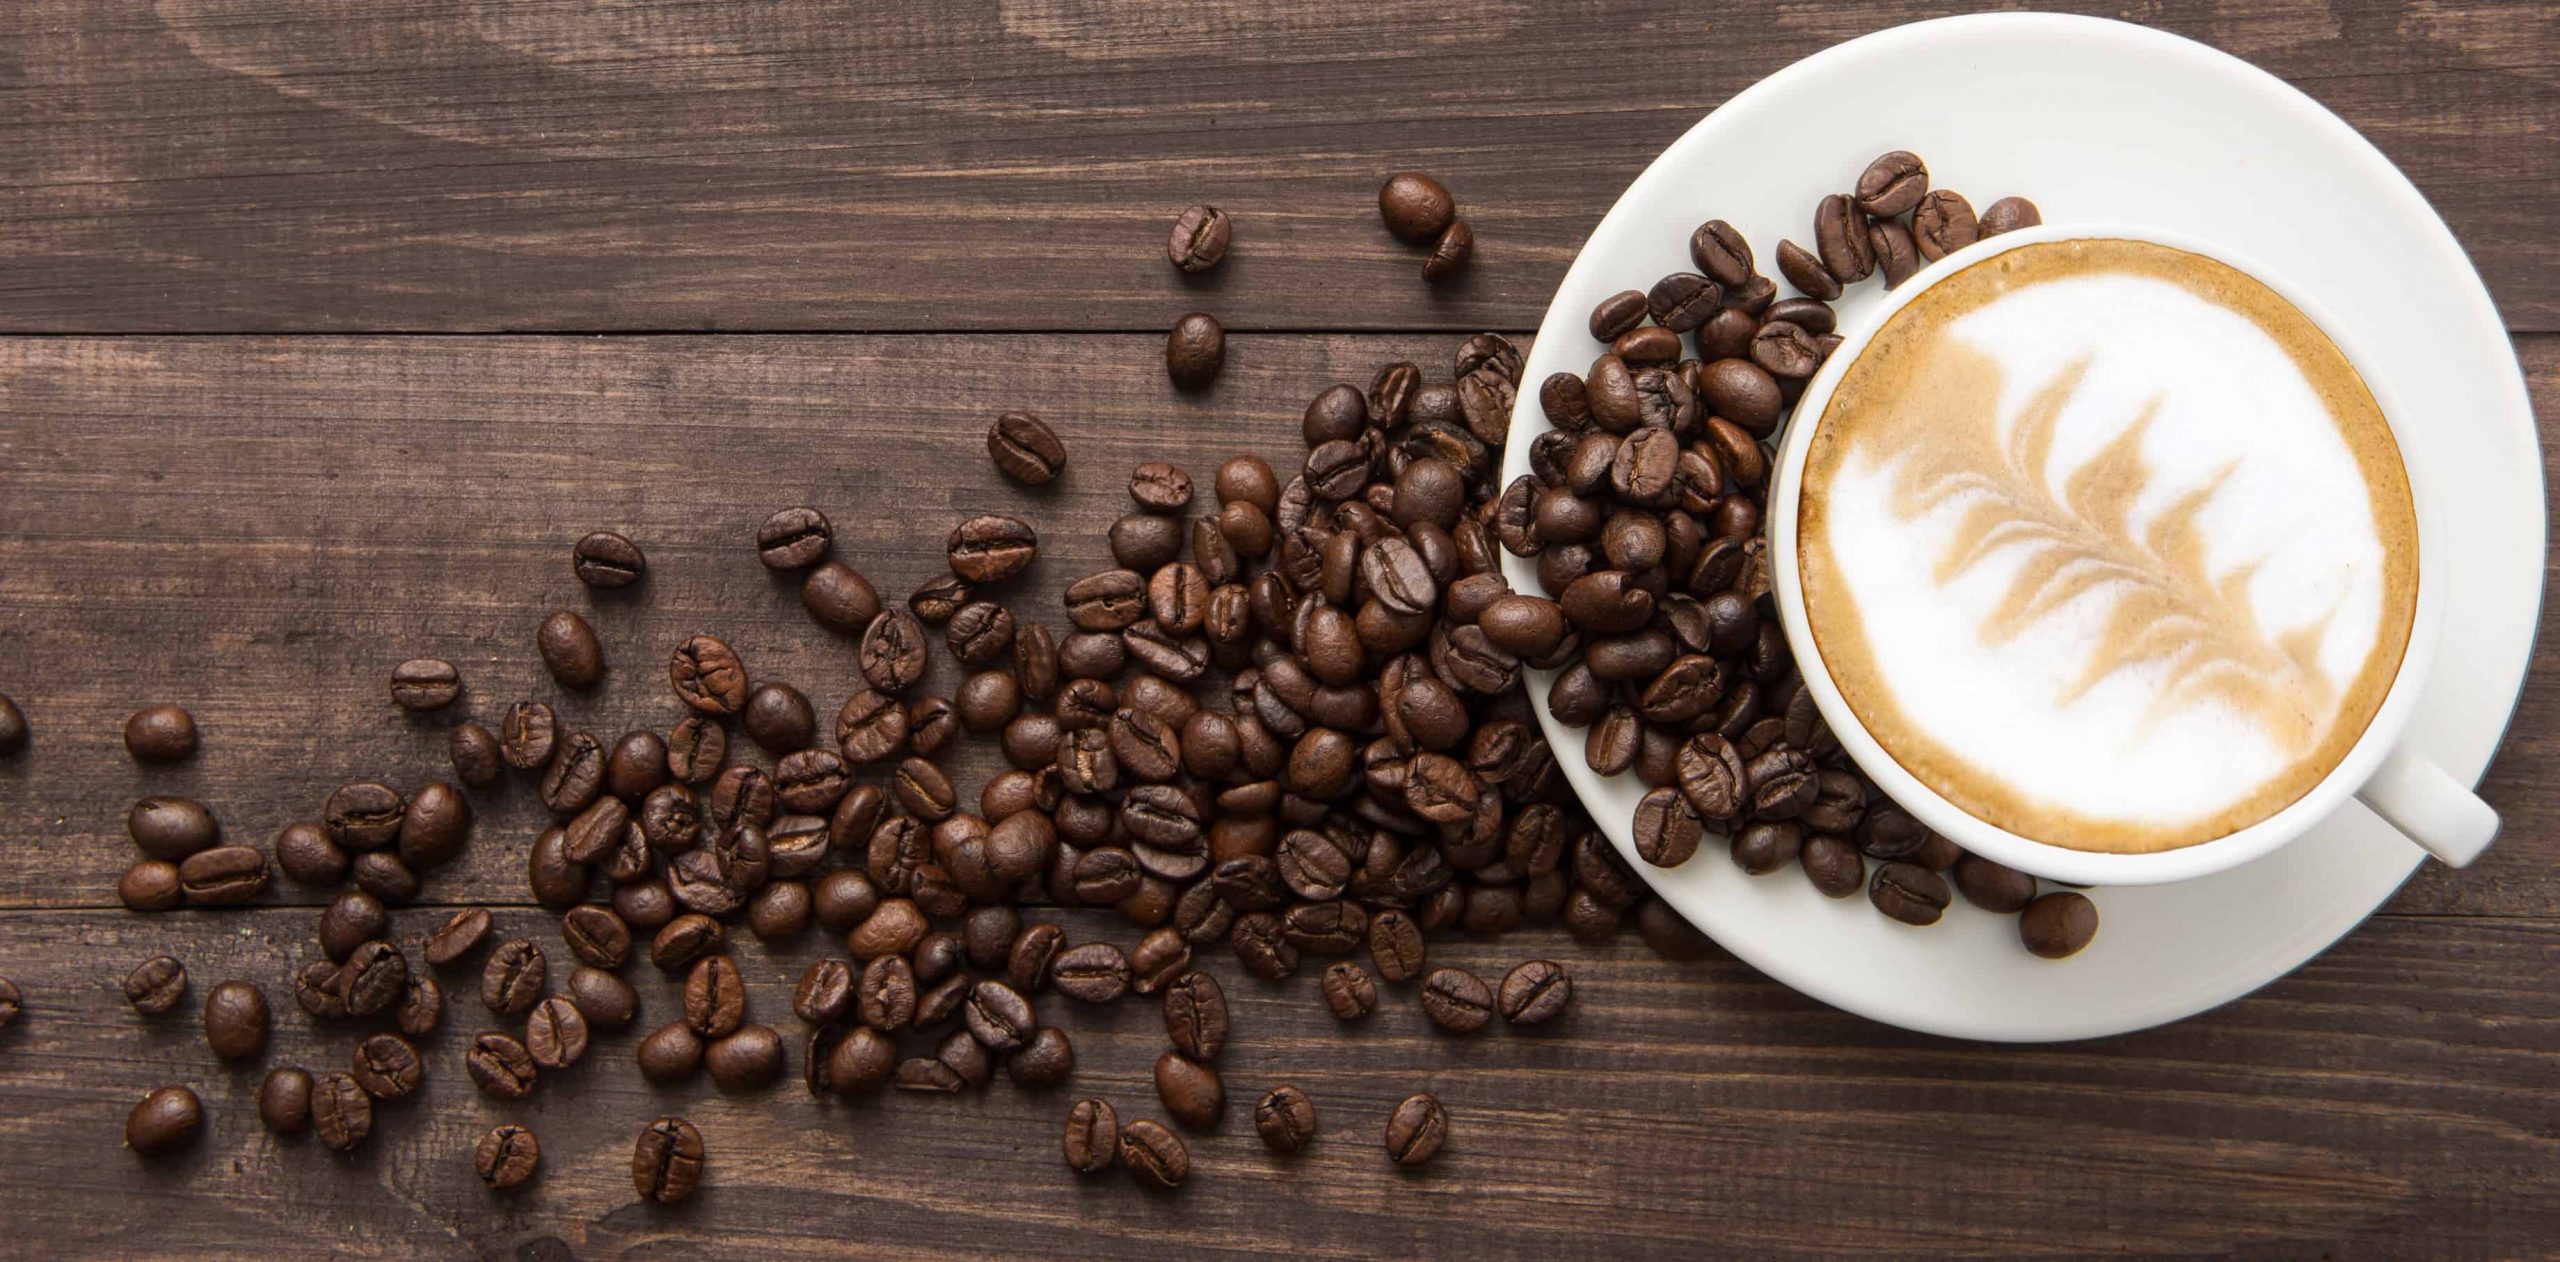 Quality Matters: Finding the Finest Wholesale Coffee Beans